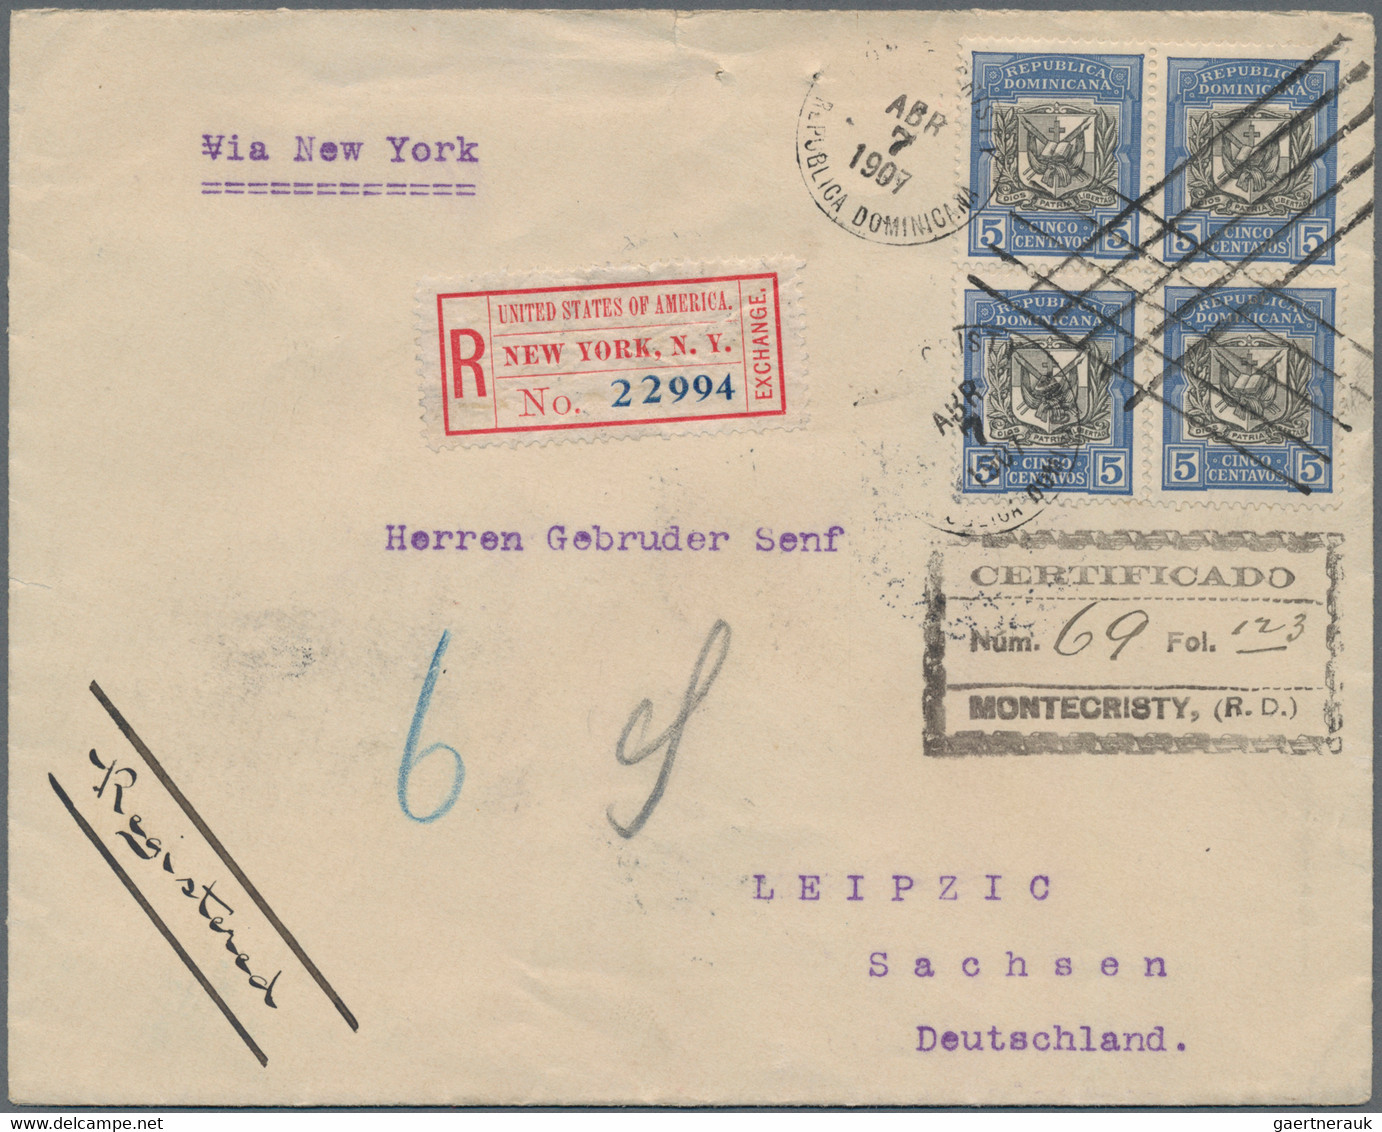 Karibik: 1880's-1950's: 60 covers, postcards and postal stationery items, with two from Danish West